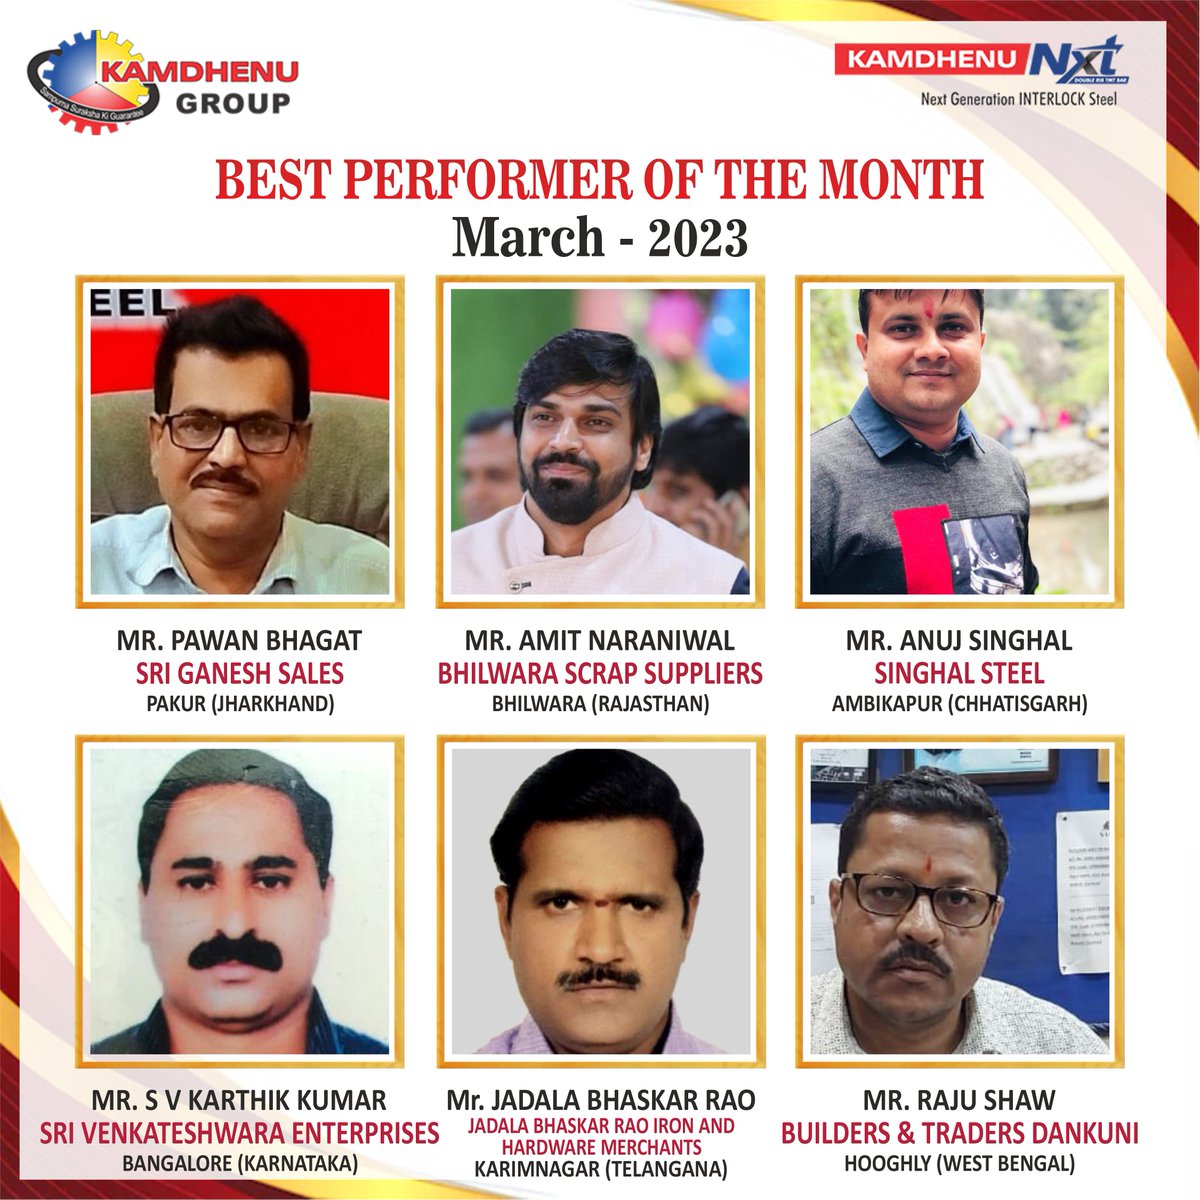 Clear focus to achieve your goal is the biggest motivation that drives results. Kamdhenu Group extends its heartiest congratulations to the best performers for March 2023.

#DealerOfTheMonth #BestPerformer #Kamdhenu #KamdhenuGroup